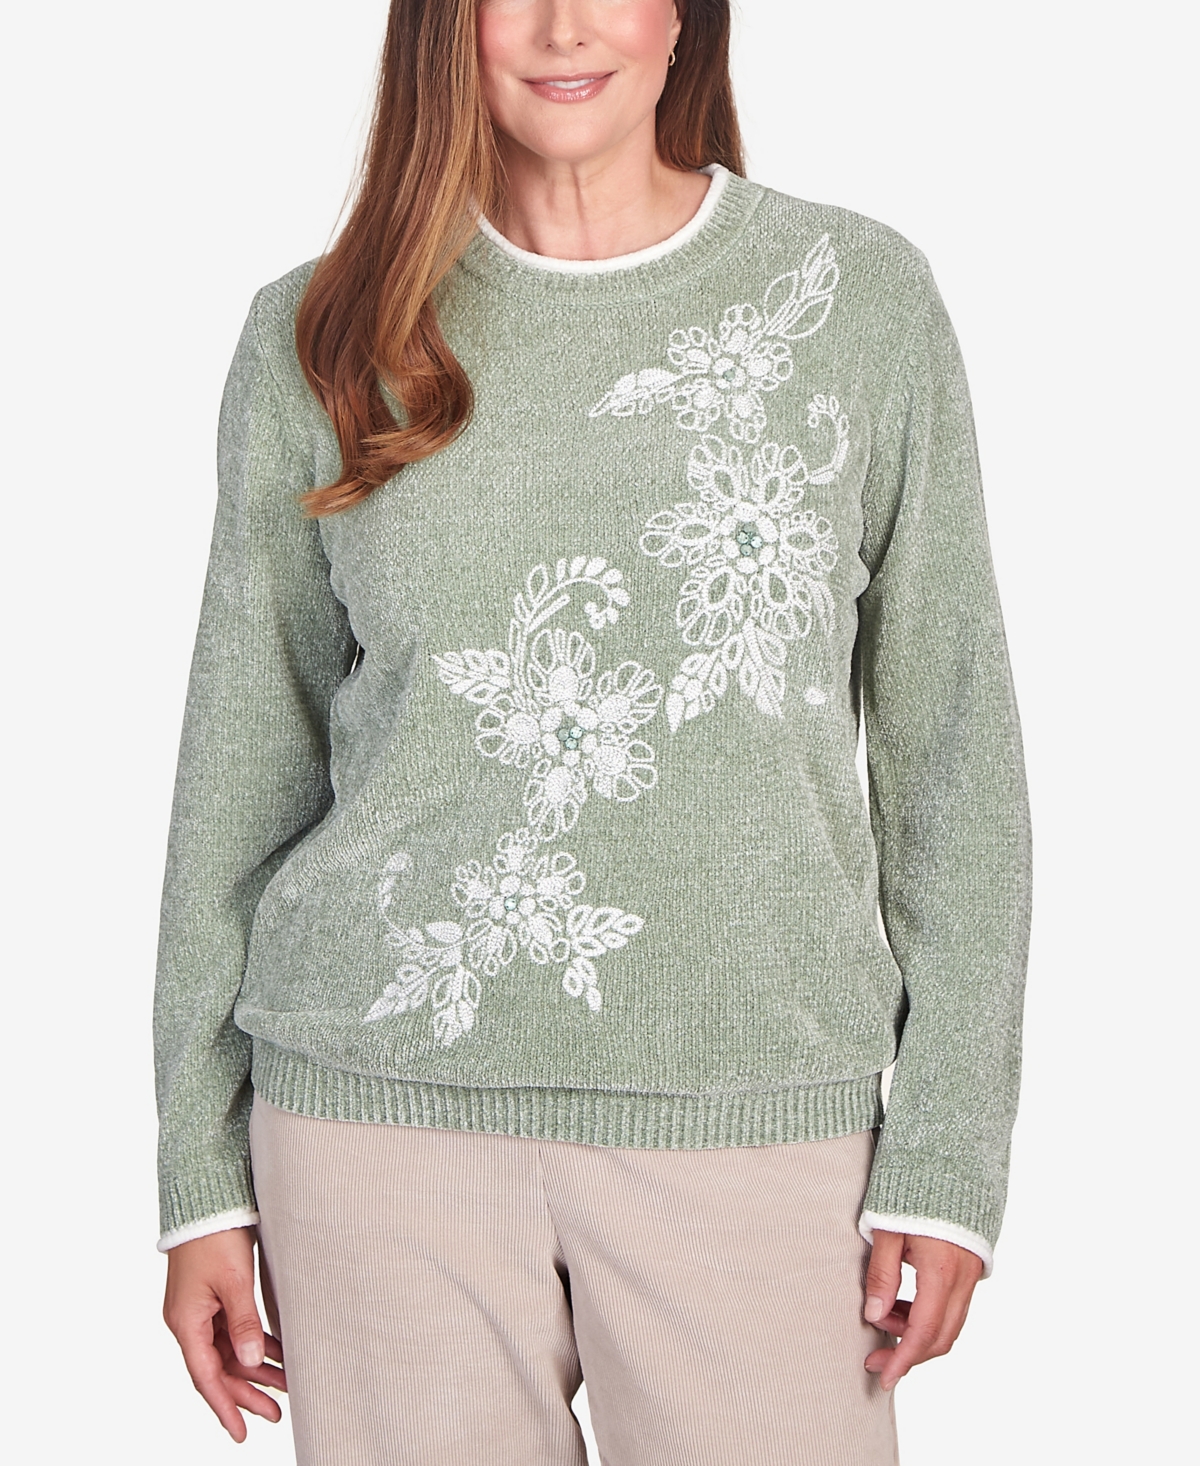 ALFRED DUNNER PETITE ST.MORITZ EMBROIDERED CHENILLE CREW NECK SWEATER